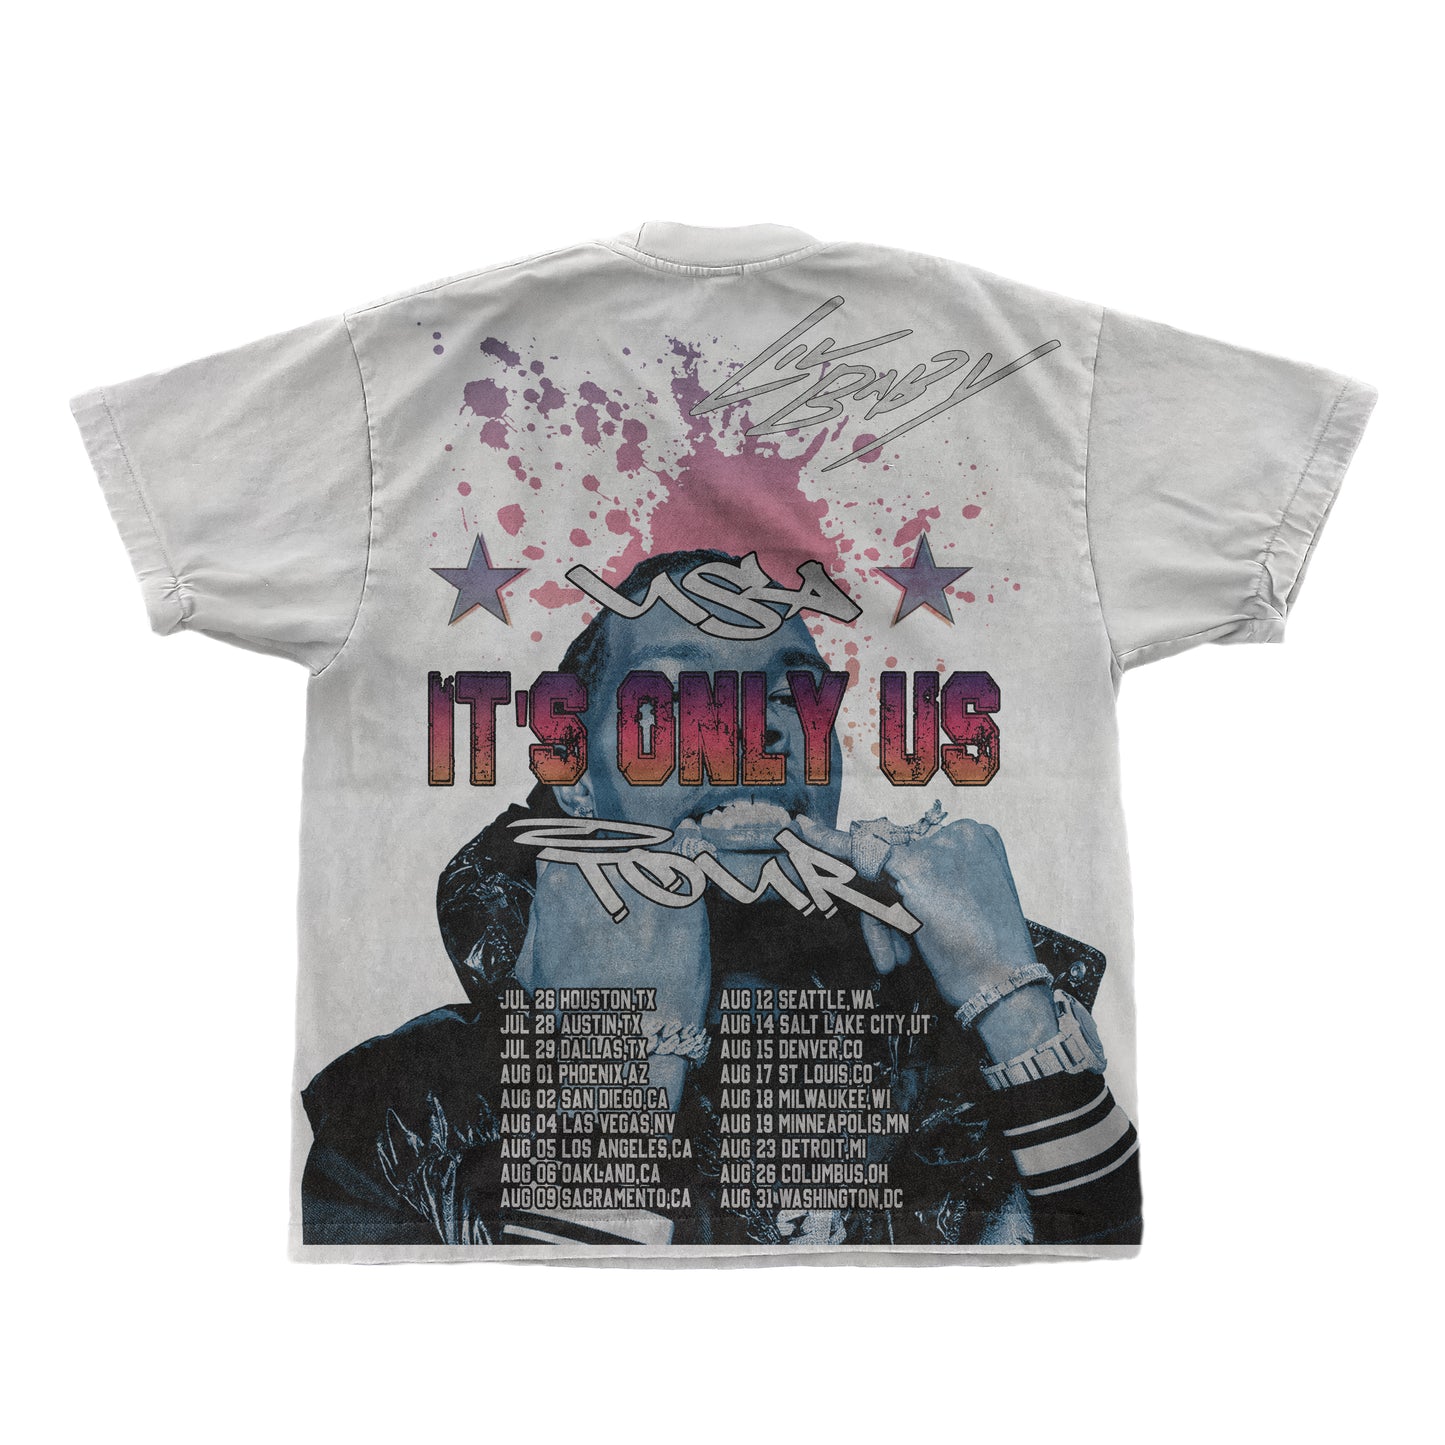 *PRE-ORDER* VIII Out Of X “Only Us Tour” T-Shirt (White)